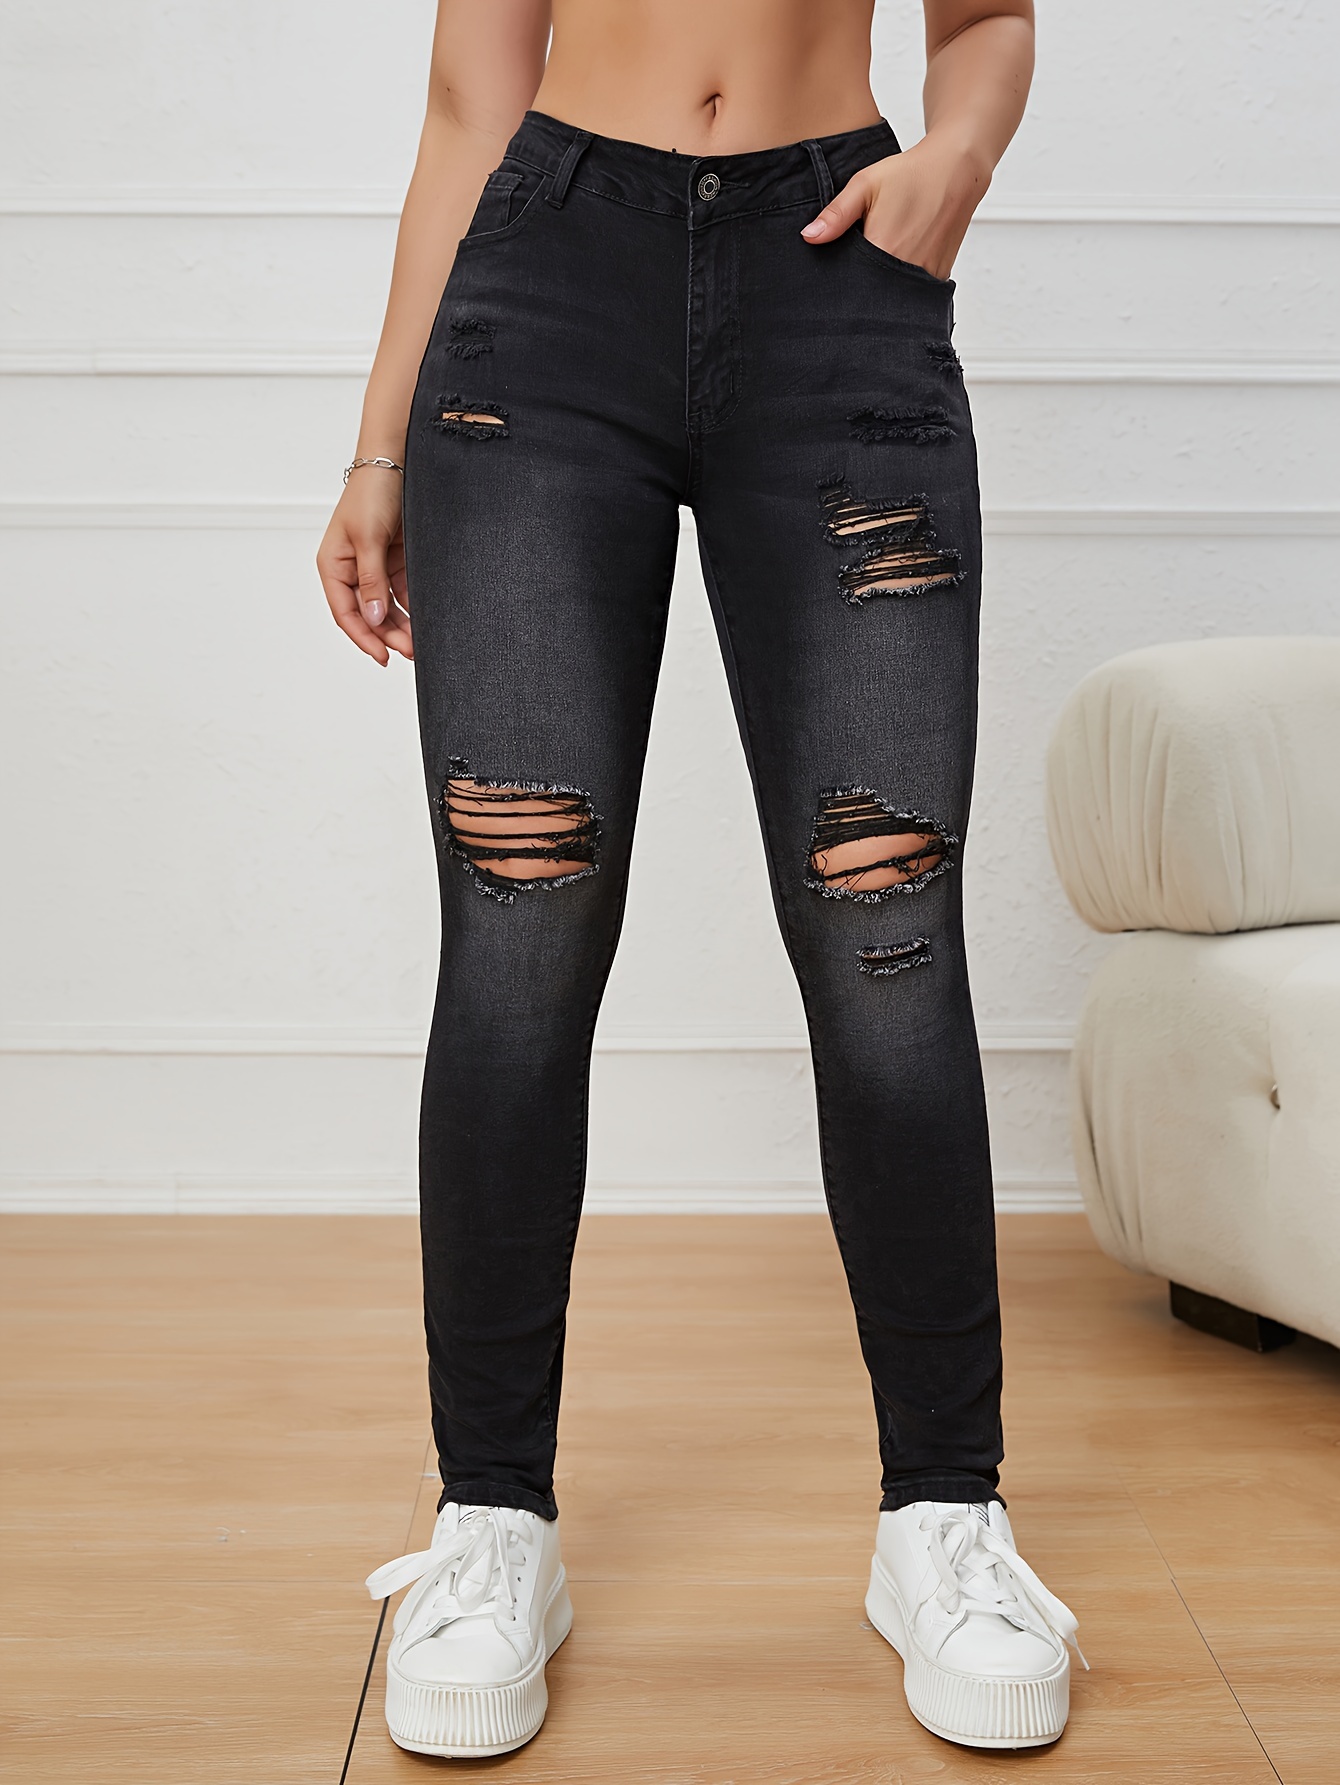 Buy A21 Fashion Ripped High Waisted Skinny Jeans for Women Stretchy Denim  Cropped Pants, 12black, Large at